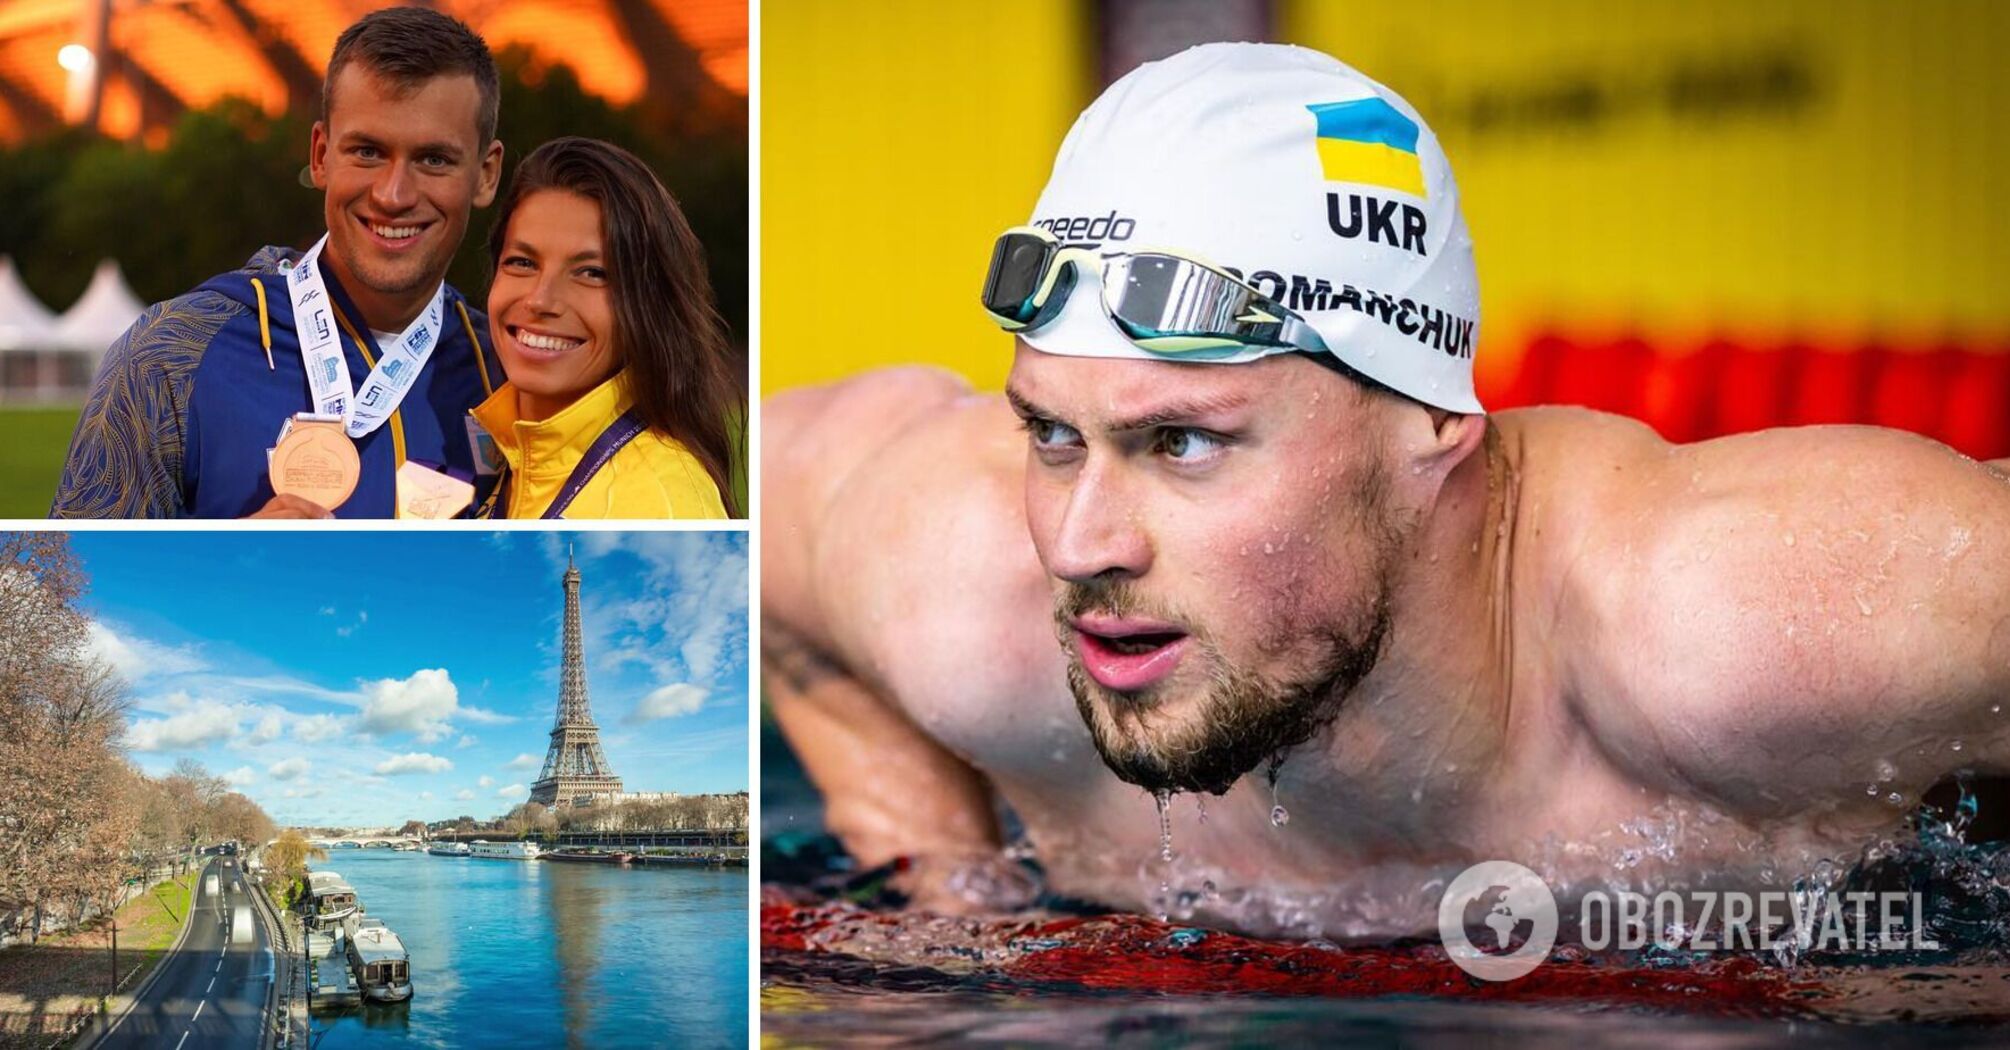 'Everything was green for me': Ukraine's flag-bearer at the Olympics refused to compete in the Seine and lives separately from his wife